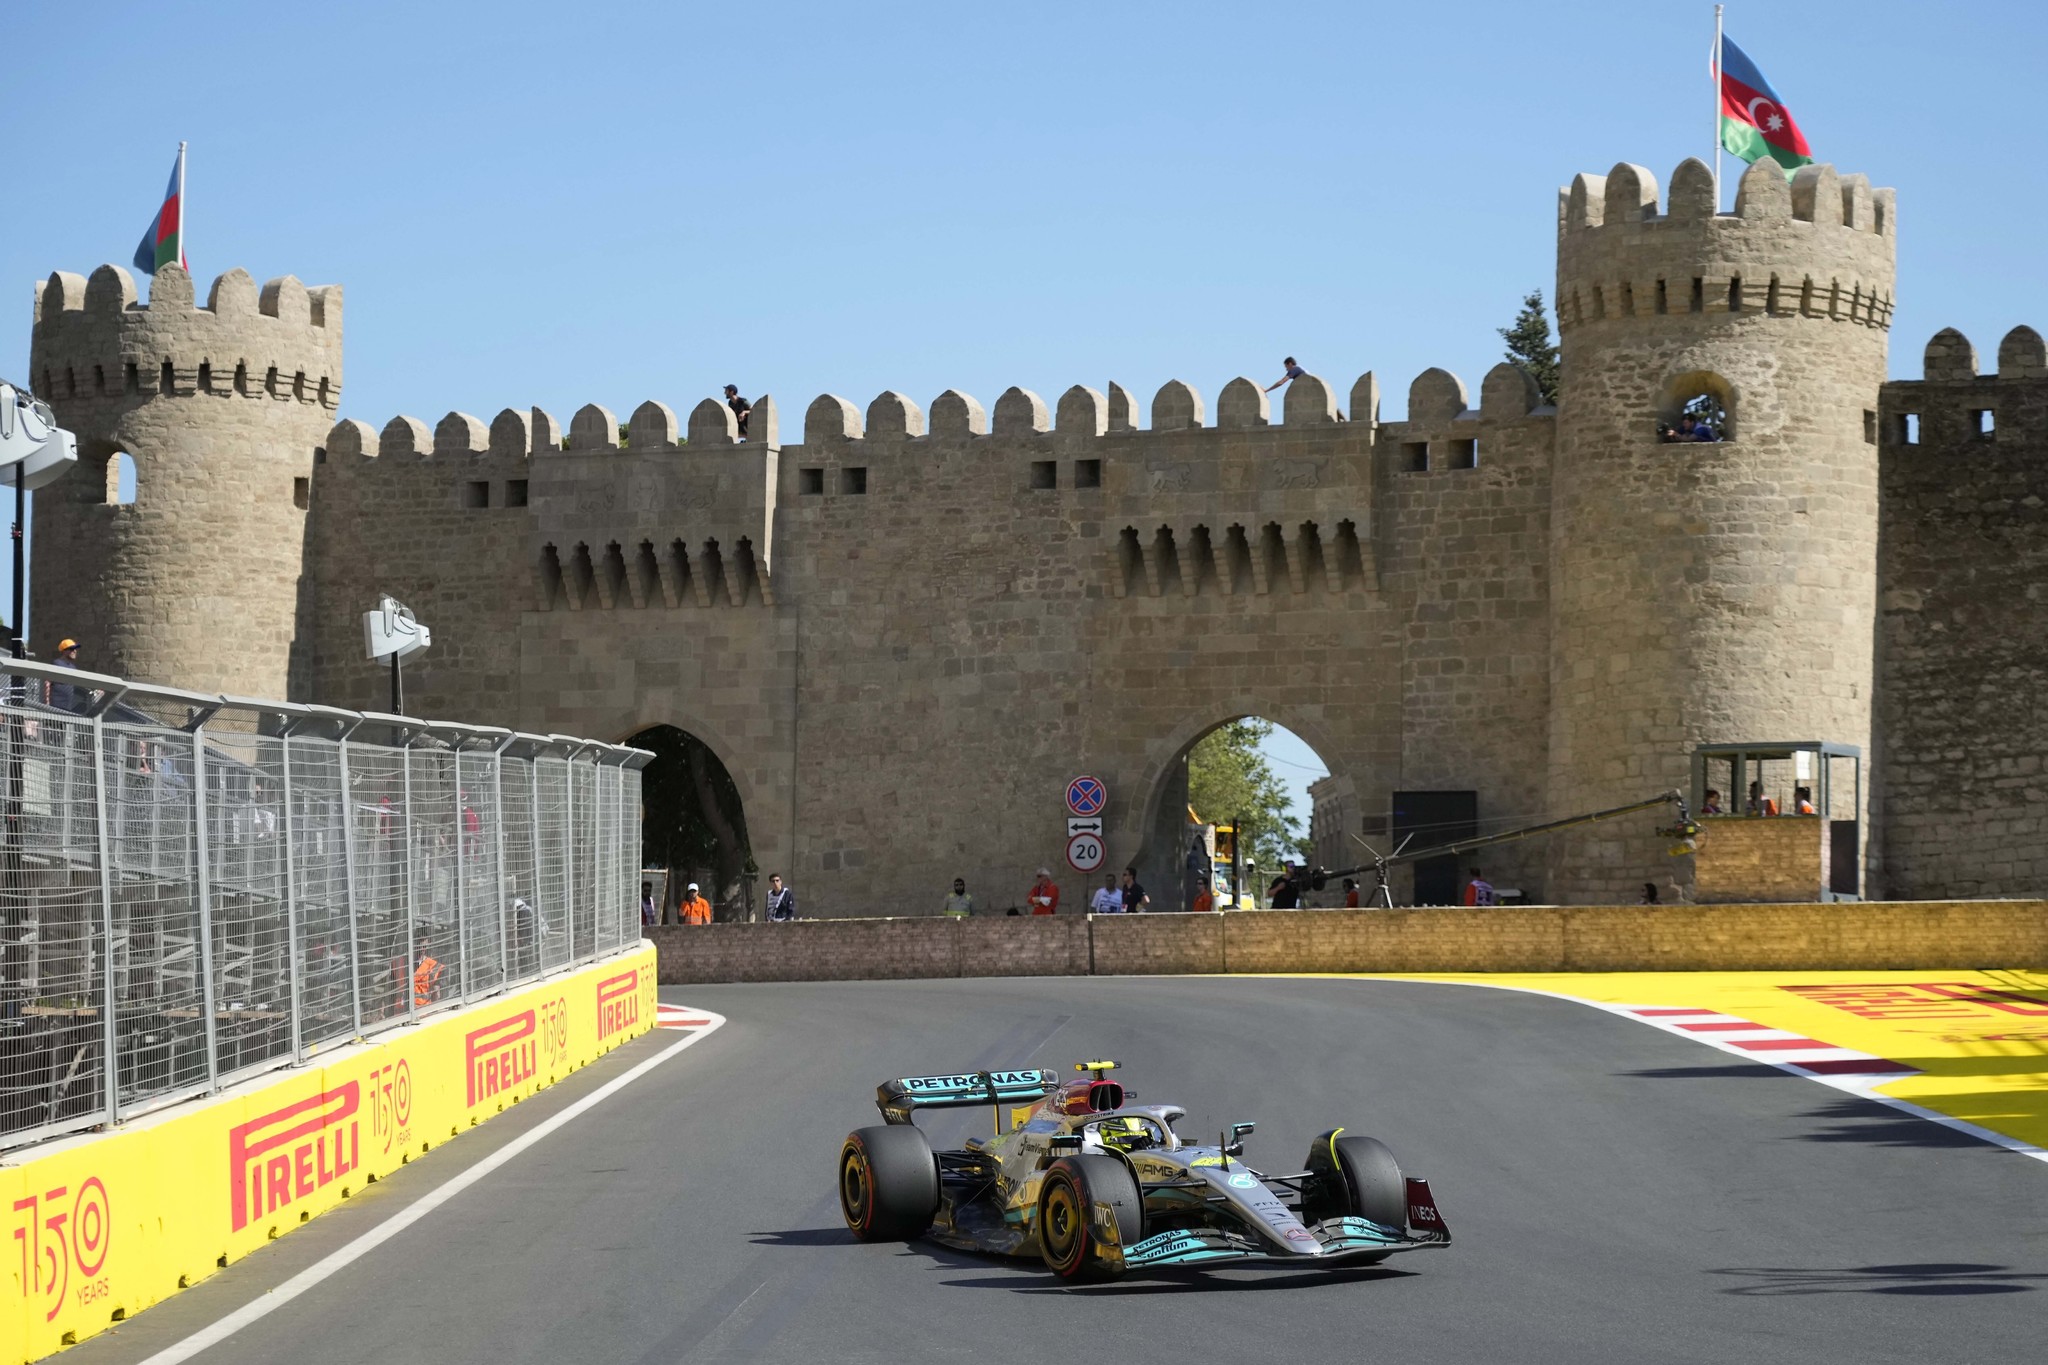 Lewis Hamilton steers his car during the first free practice at the Baku circuit.